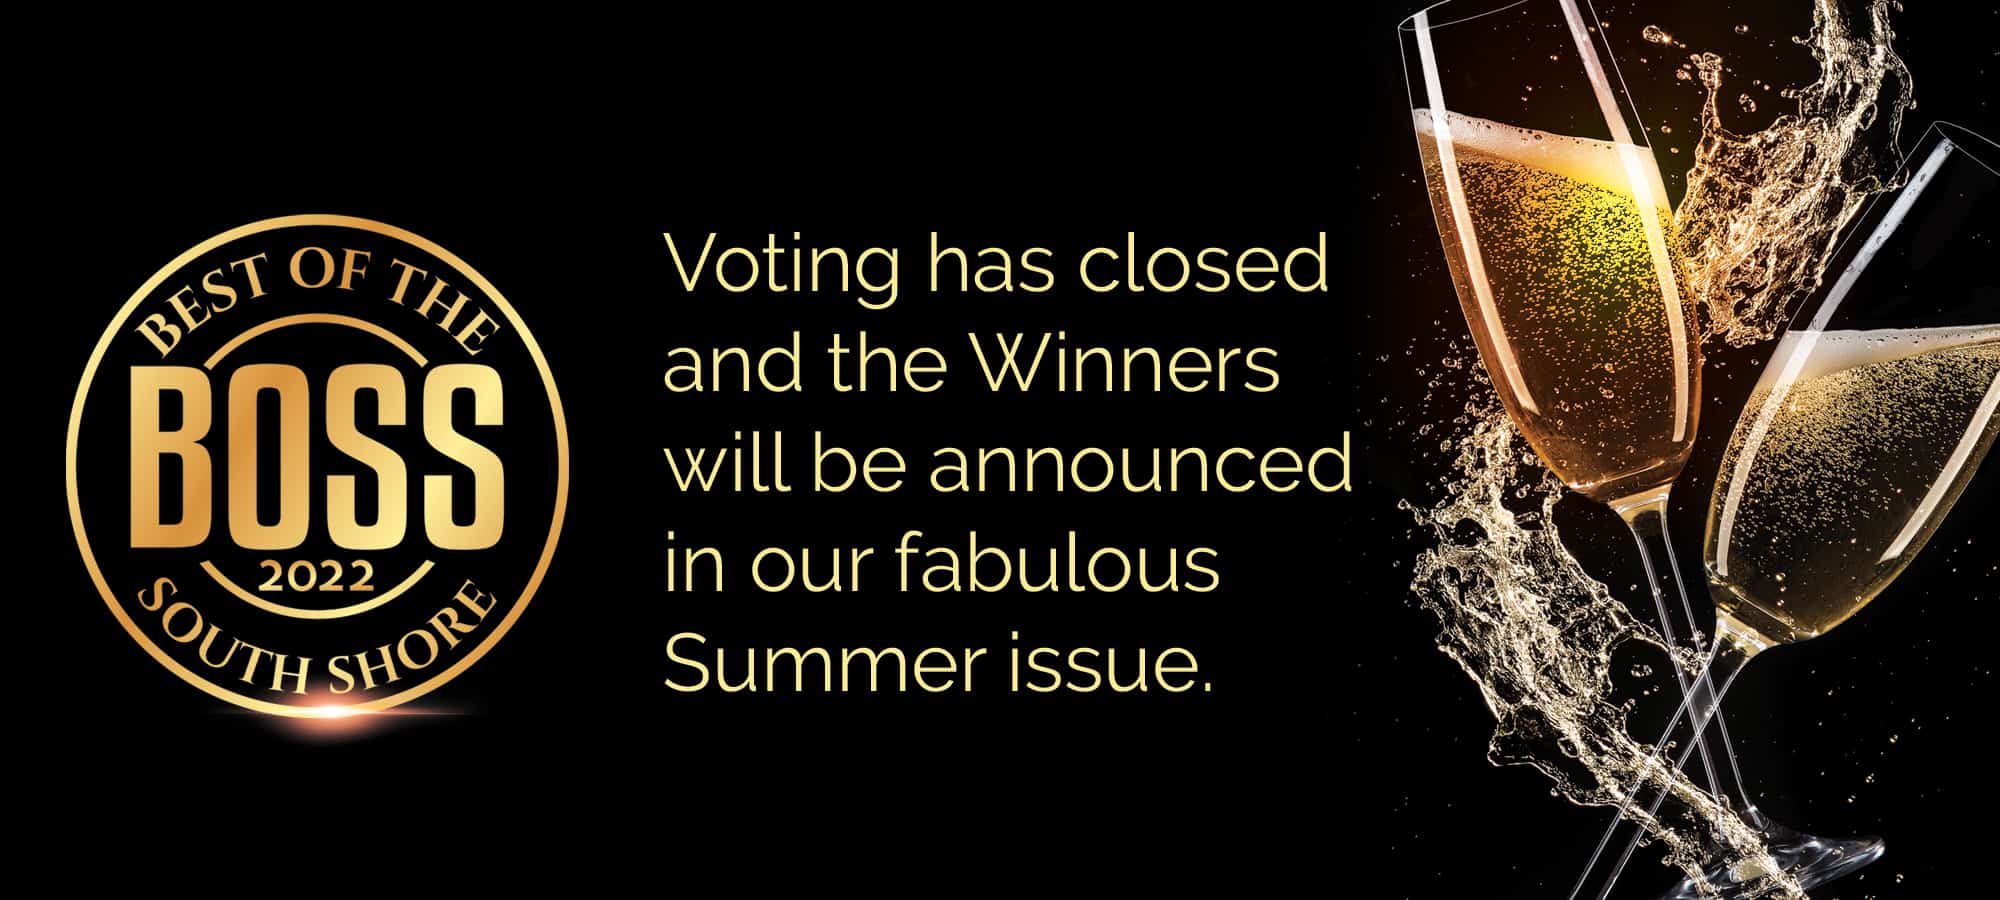 Winners Announced in our Summer issue